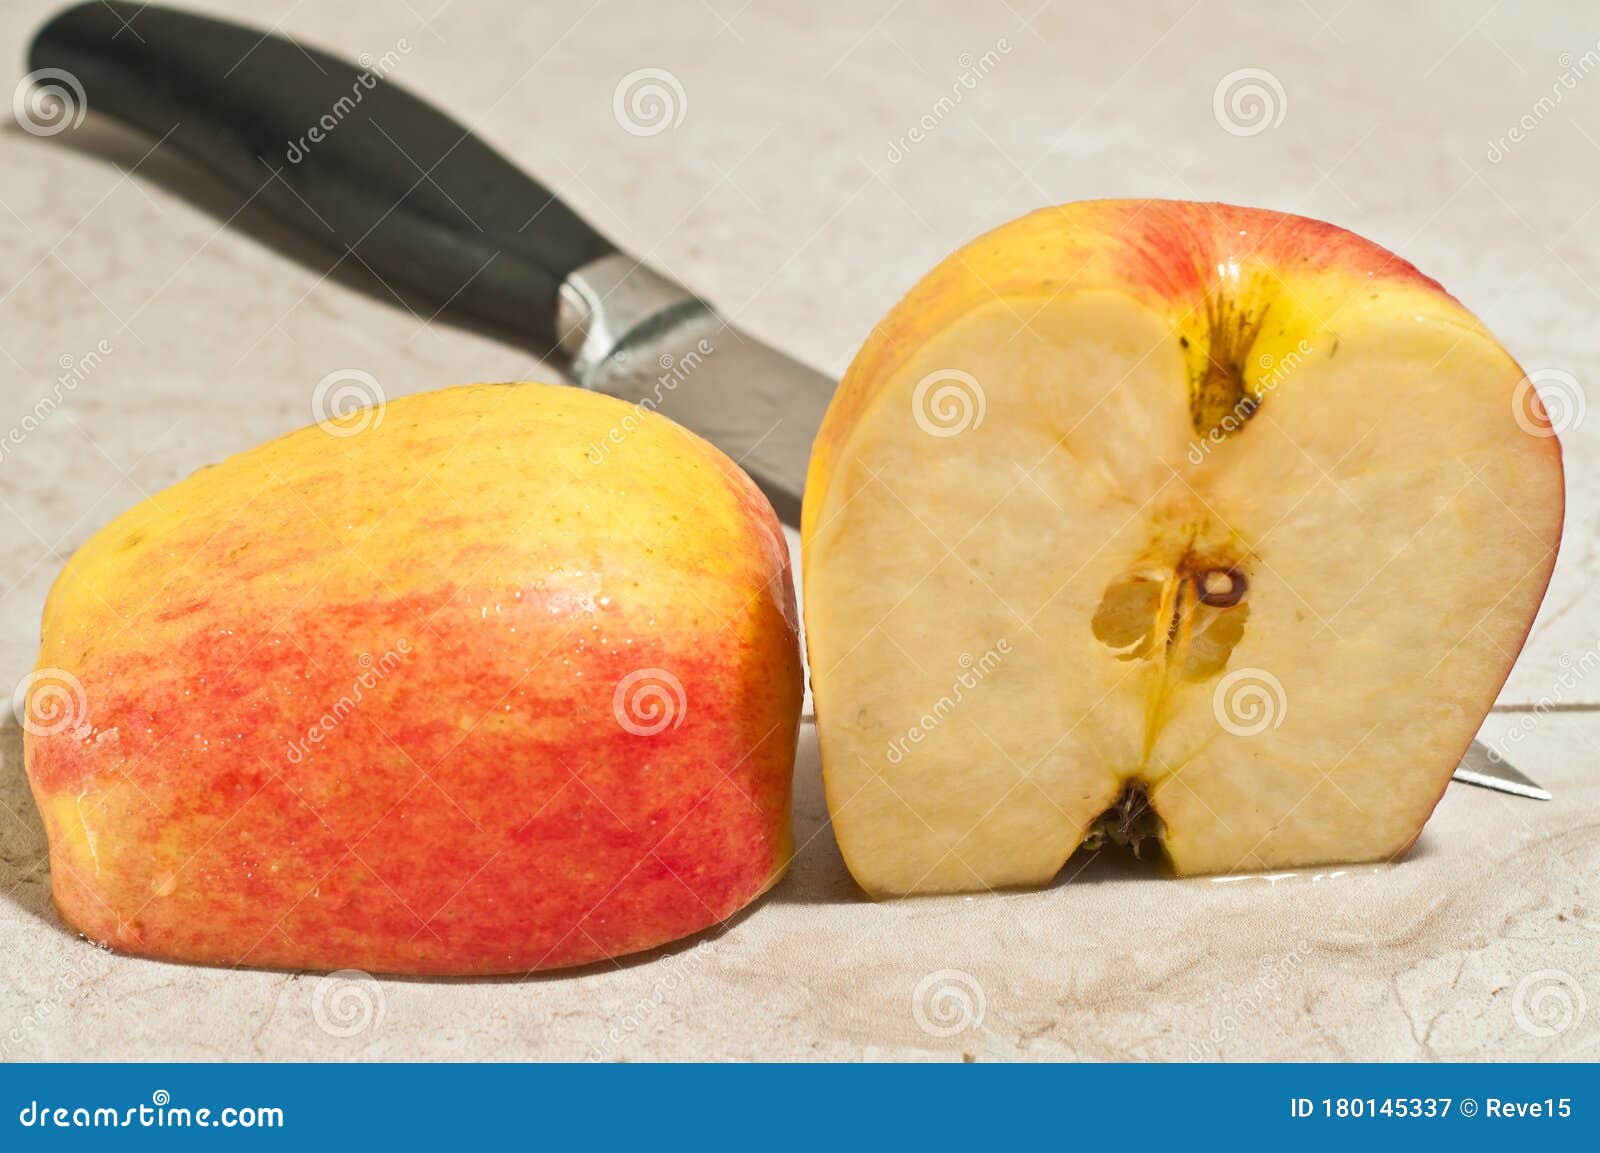 How to Split an Apple Without a Knife 